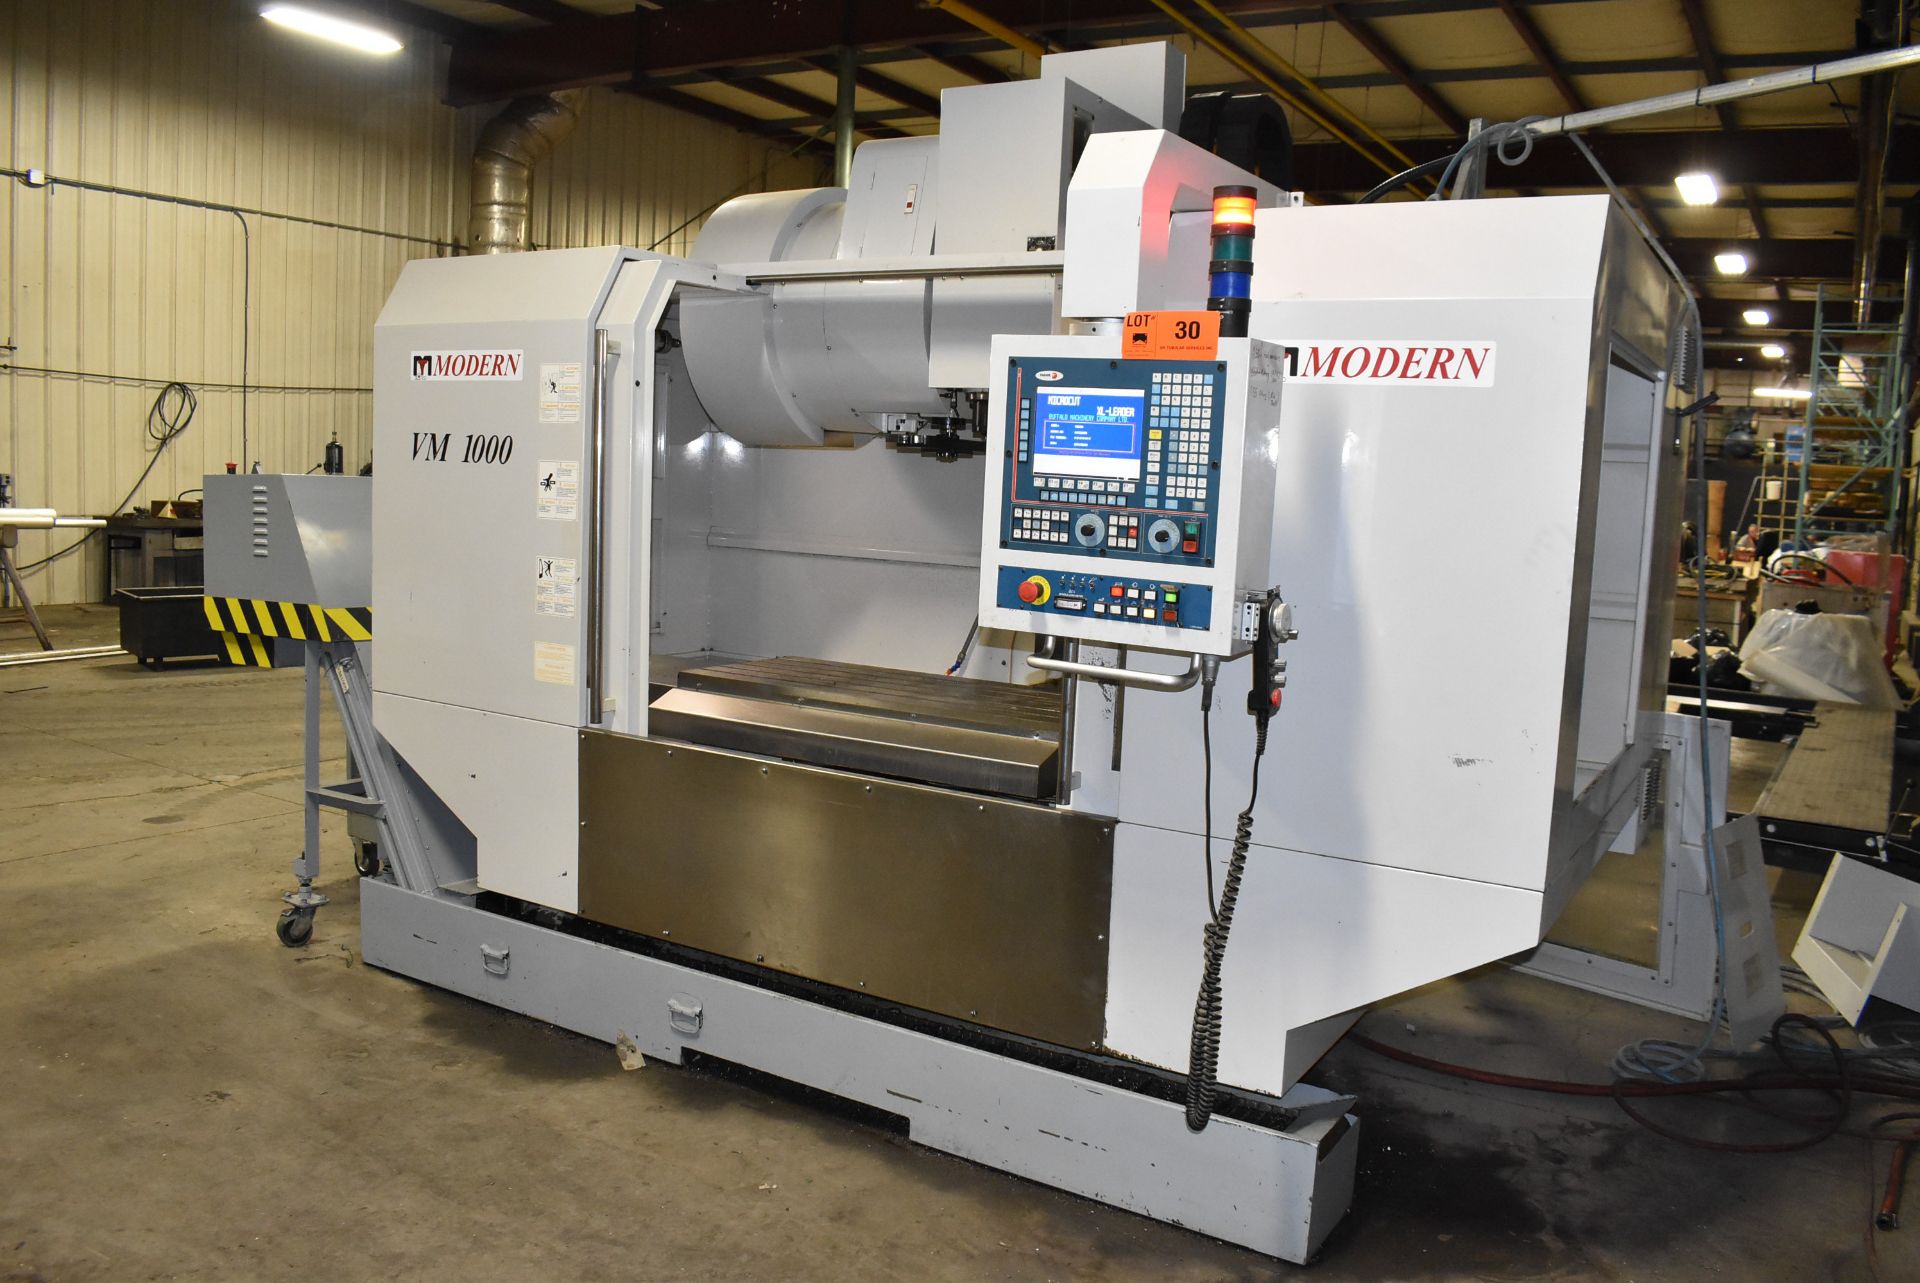 MODERN (2004) VM-1000 HIGH SPEED CNC VERTICAL MACHINING CENTER WITH FAGOR 8055M CNC CONTROL, 19" X - Image 2 of 23